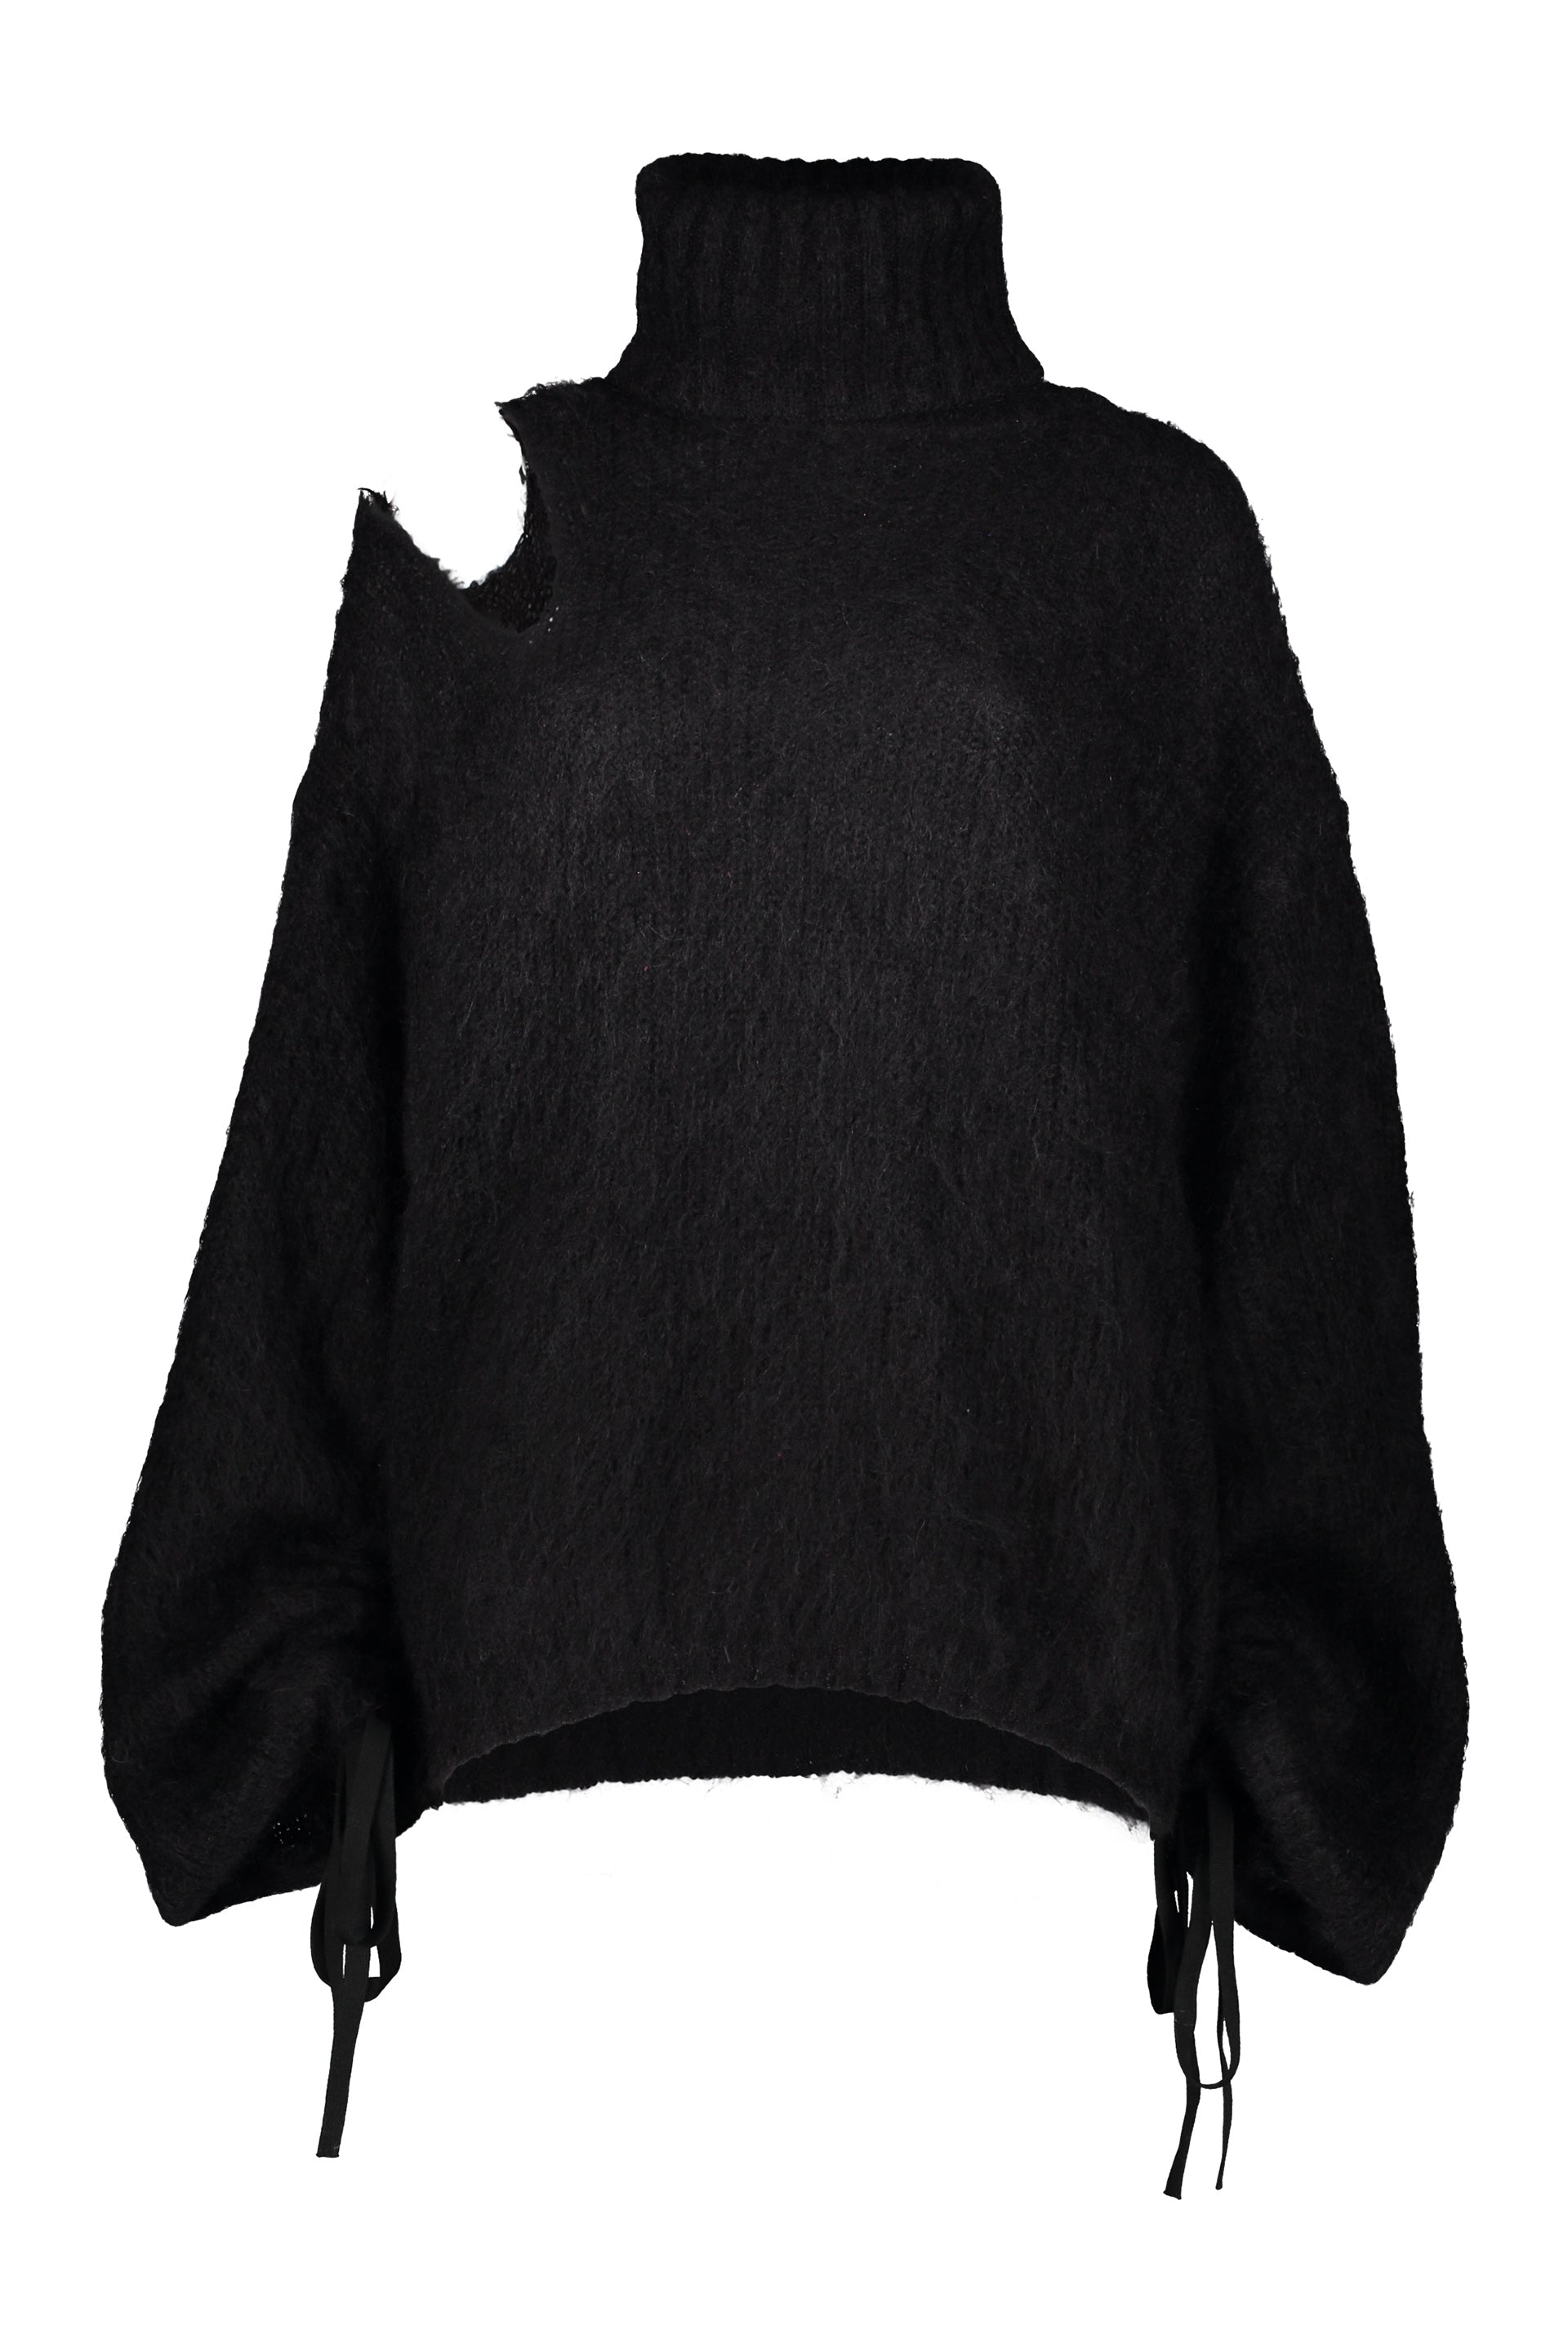 ANDREADAMO-OUTLET-SALE-Turtleneck-sweater-Strick-LXL-ARCHIVE-COLLECTION.jpg